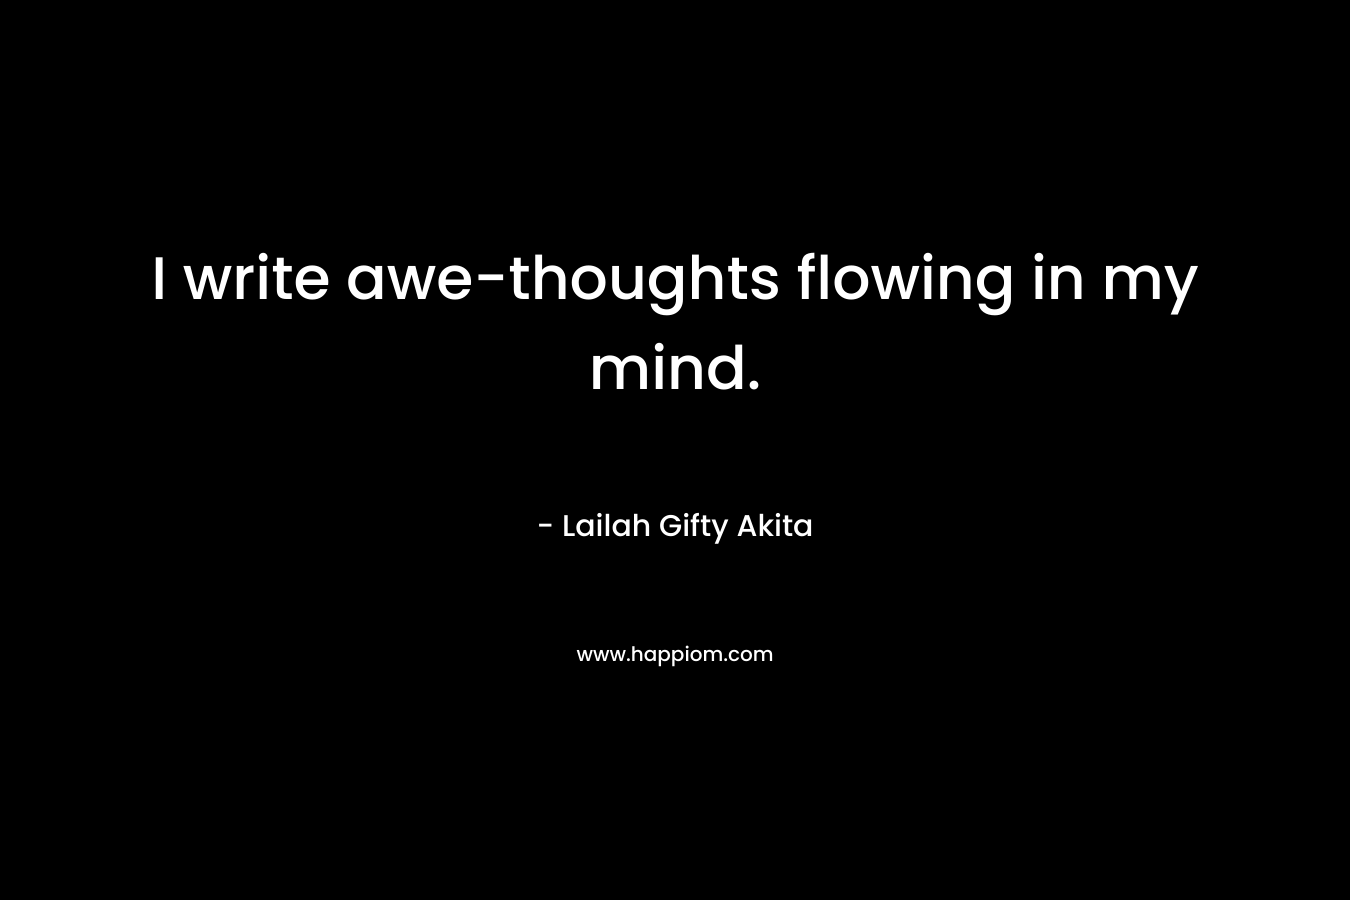 I write awe-thoughts flowing in my mind.